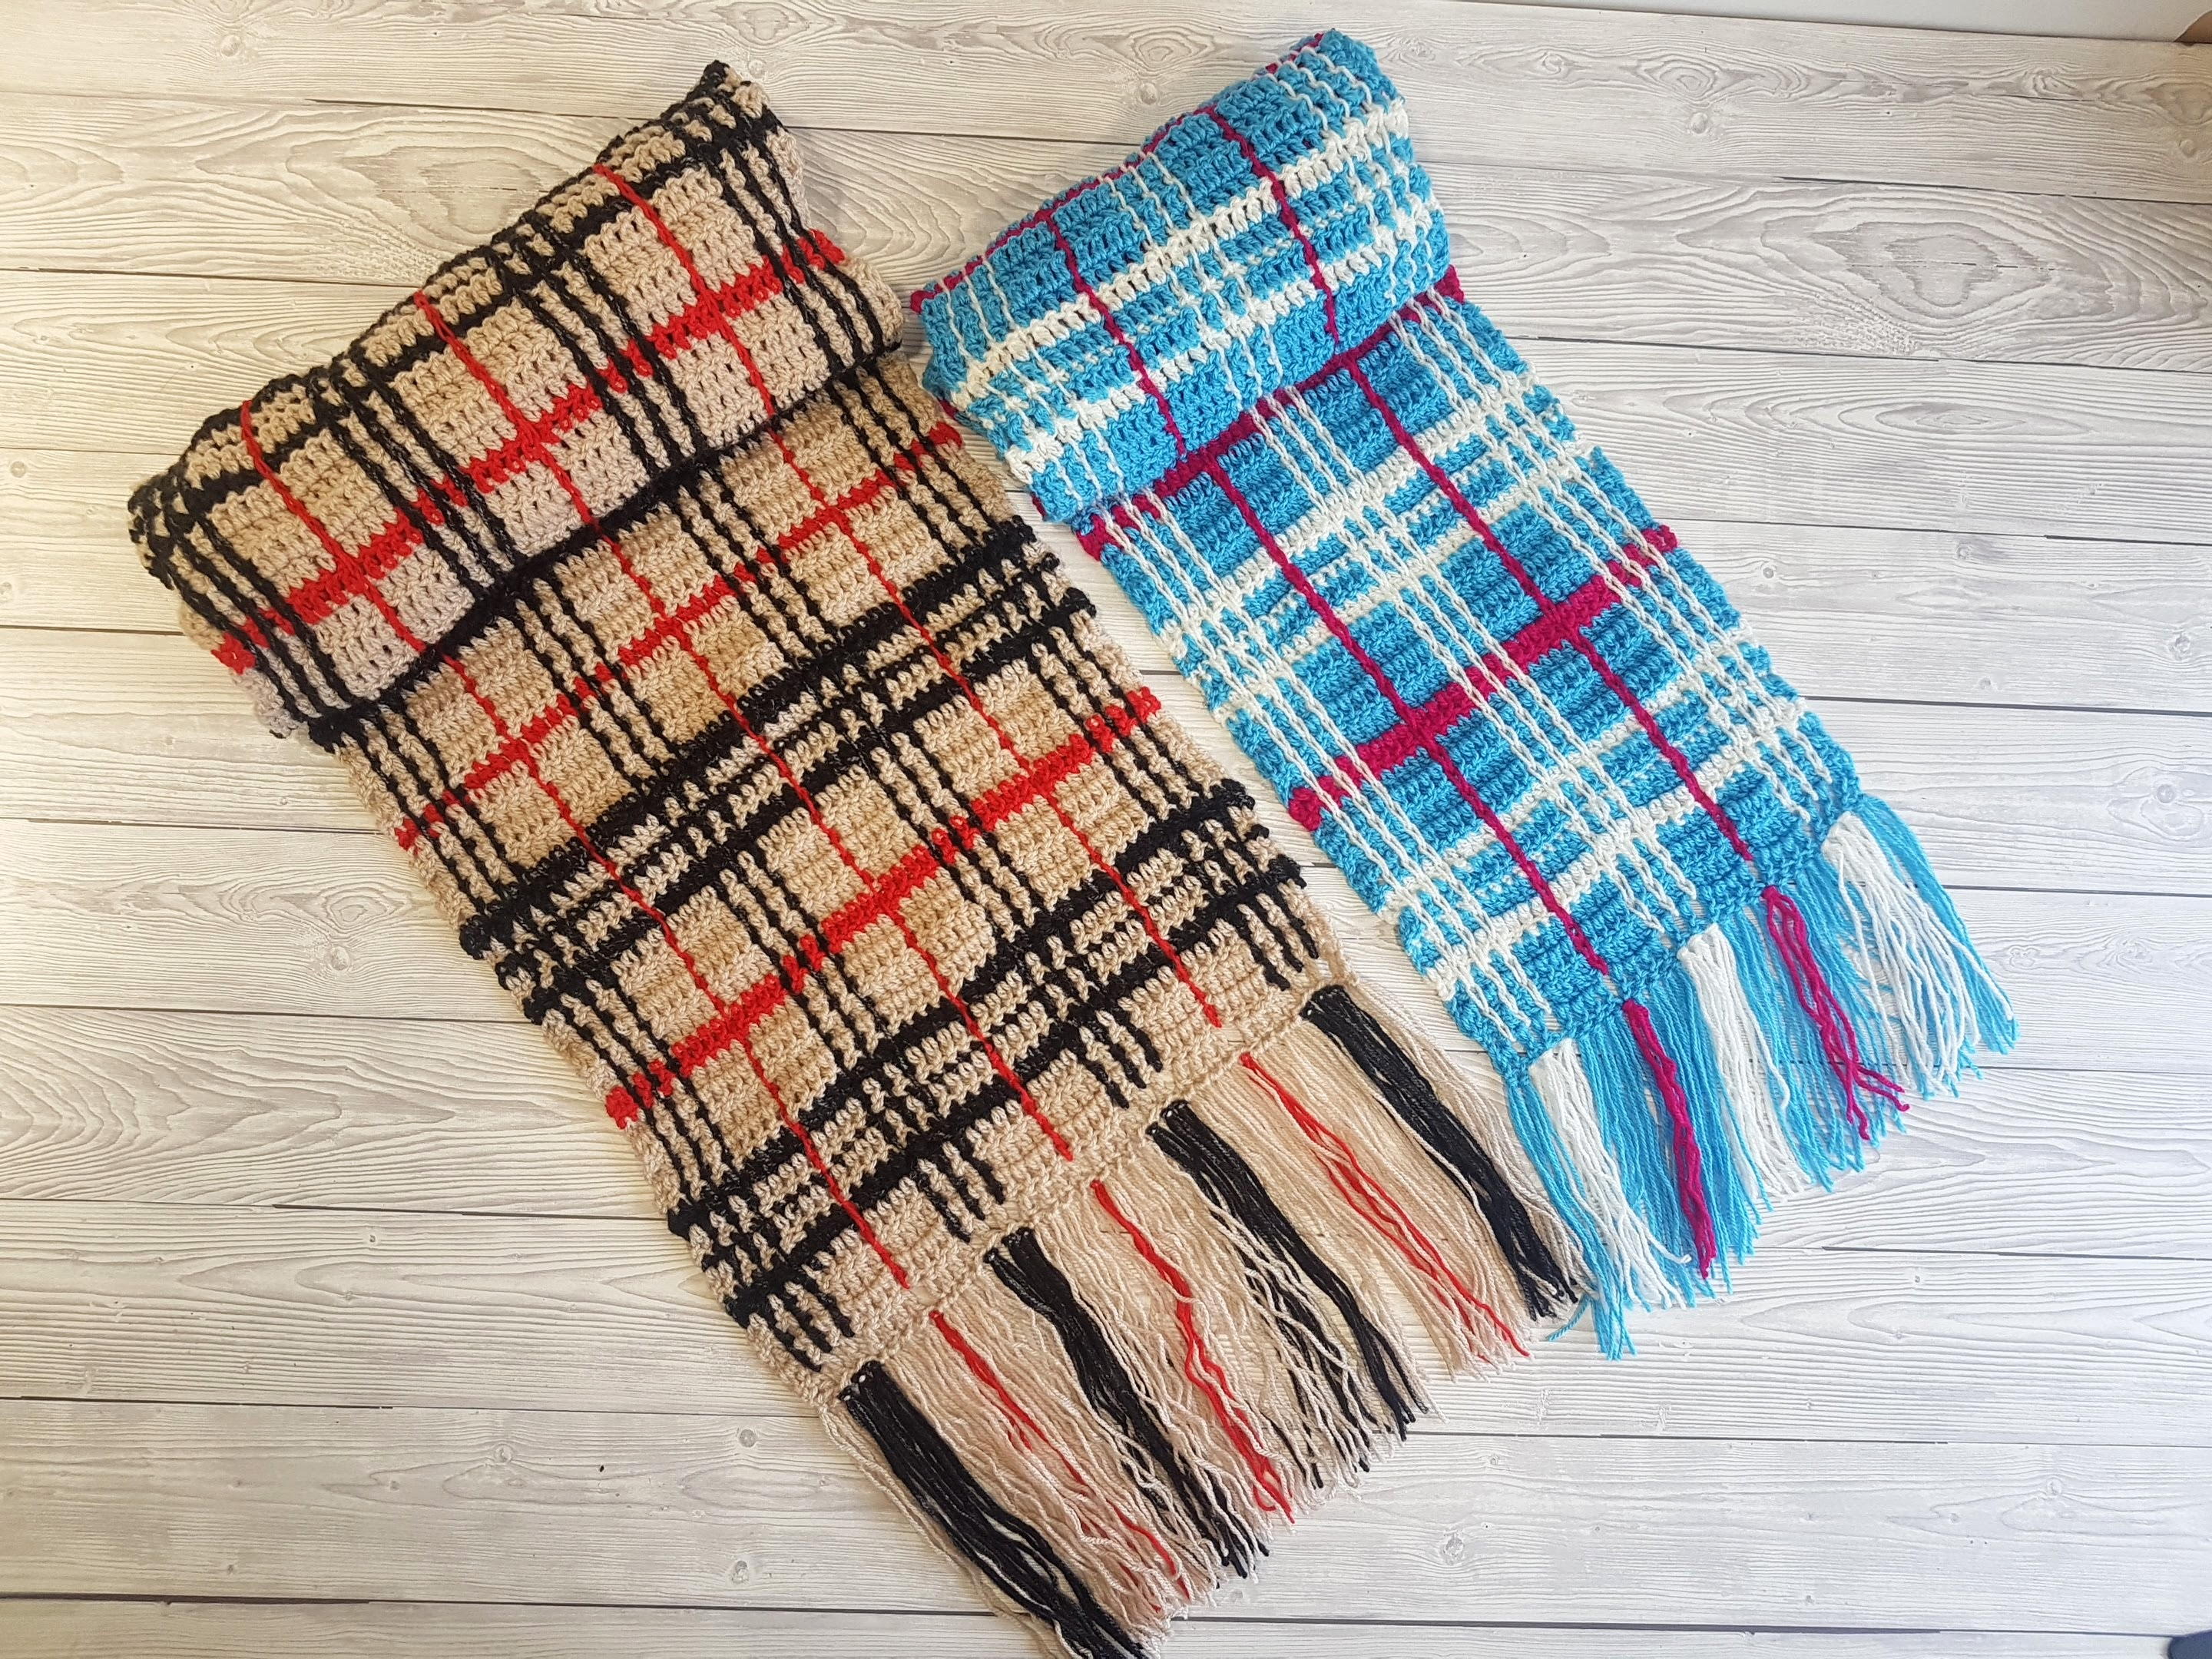 Crochet Plaid Scarf For Beginners – A Free Pattern & Video Tutorial